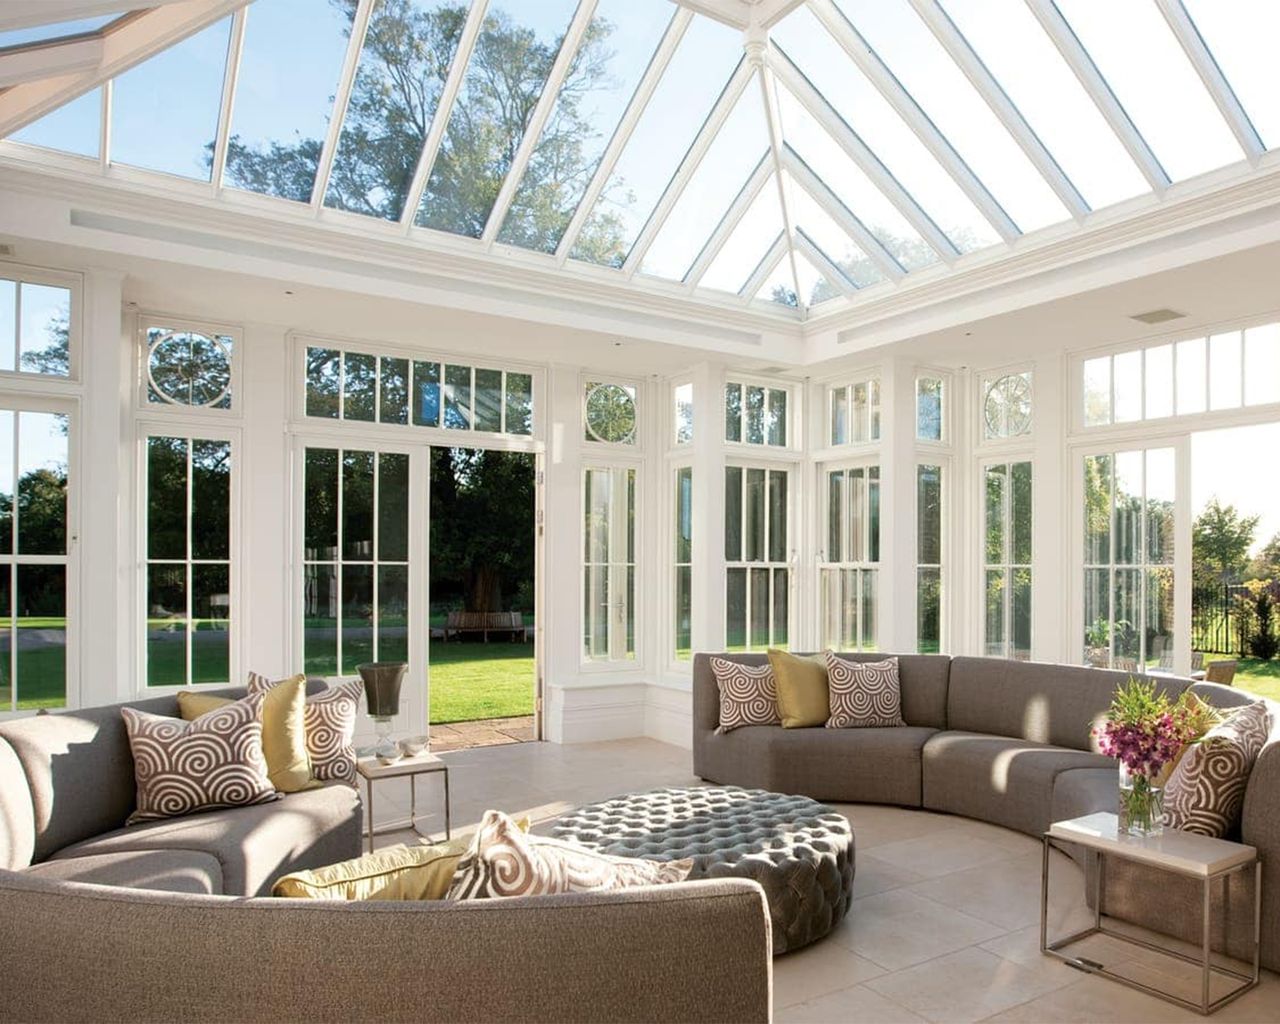 Orangery ideas: 19 designs, plus costs and planning advice | Real Homes